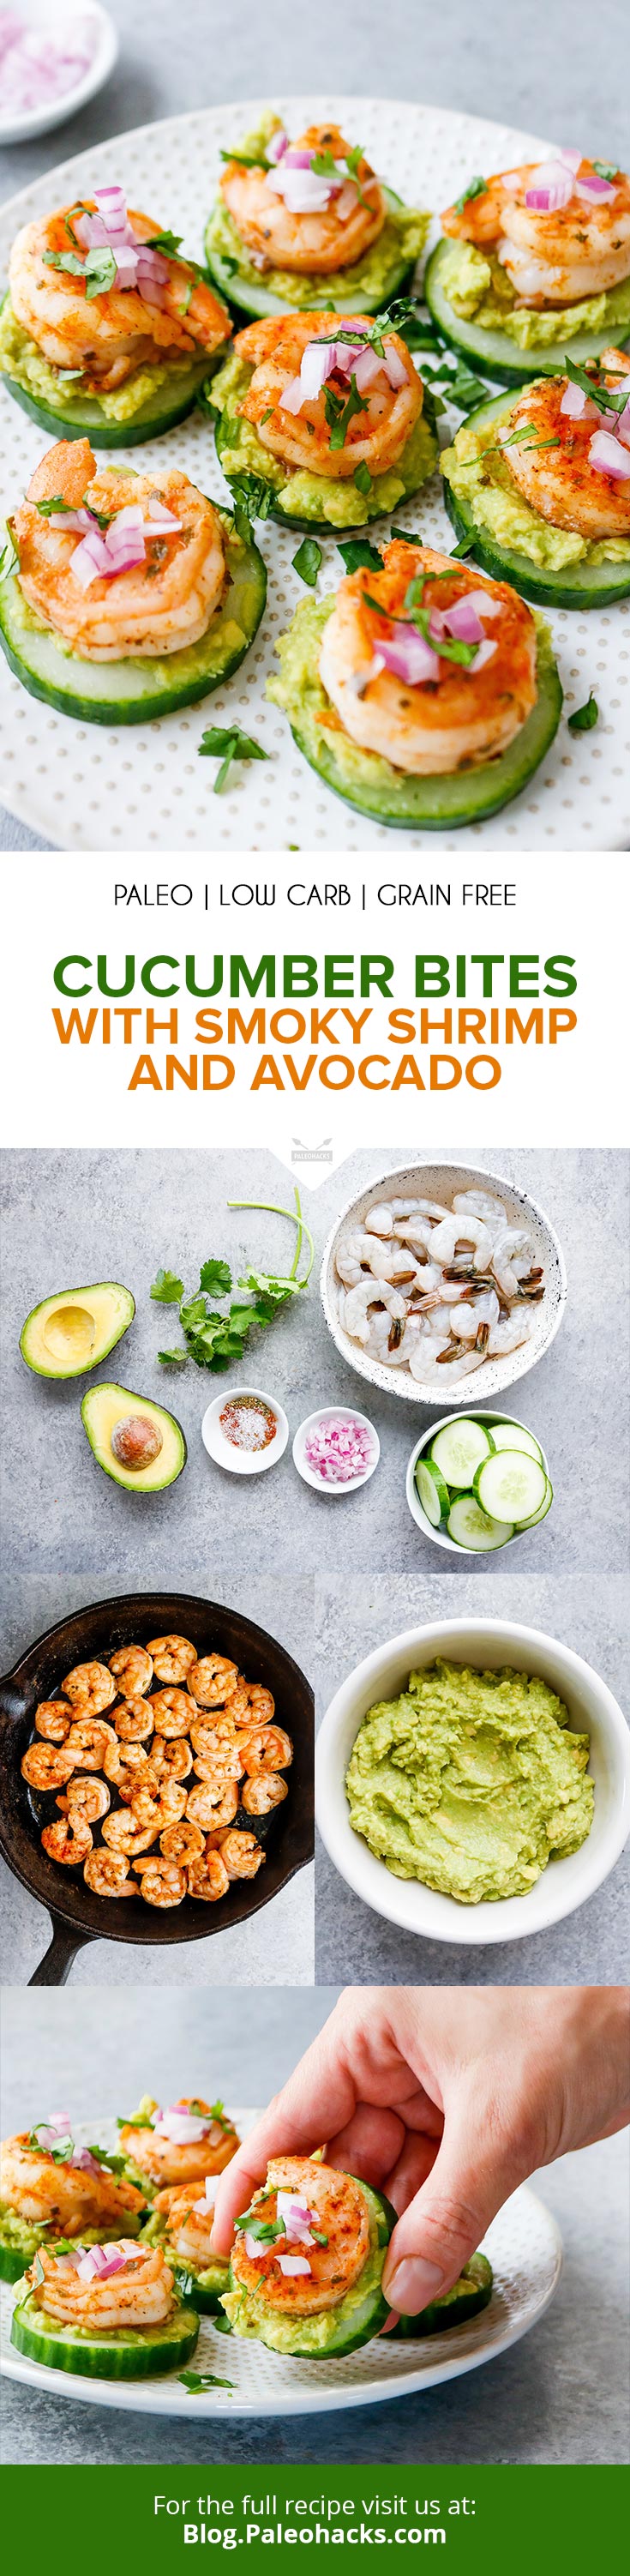 Stack cucumber rounds with zesty shrimp and avocado for a healthy and indulgent snack. Step aside deviled eggs, these bites are the new tasty teaser in town!